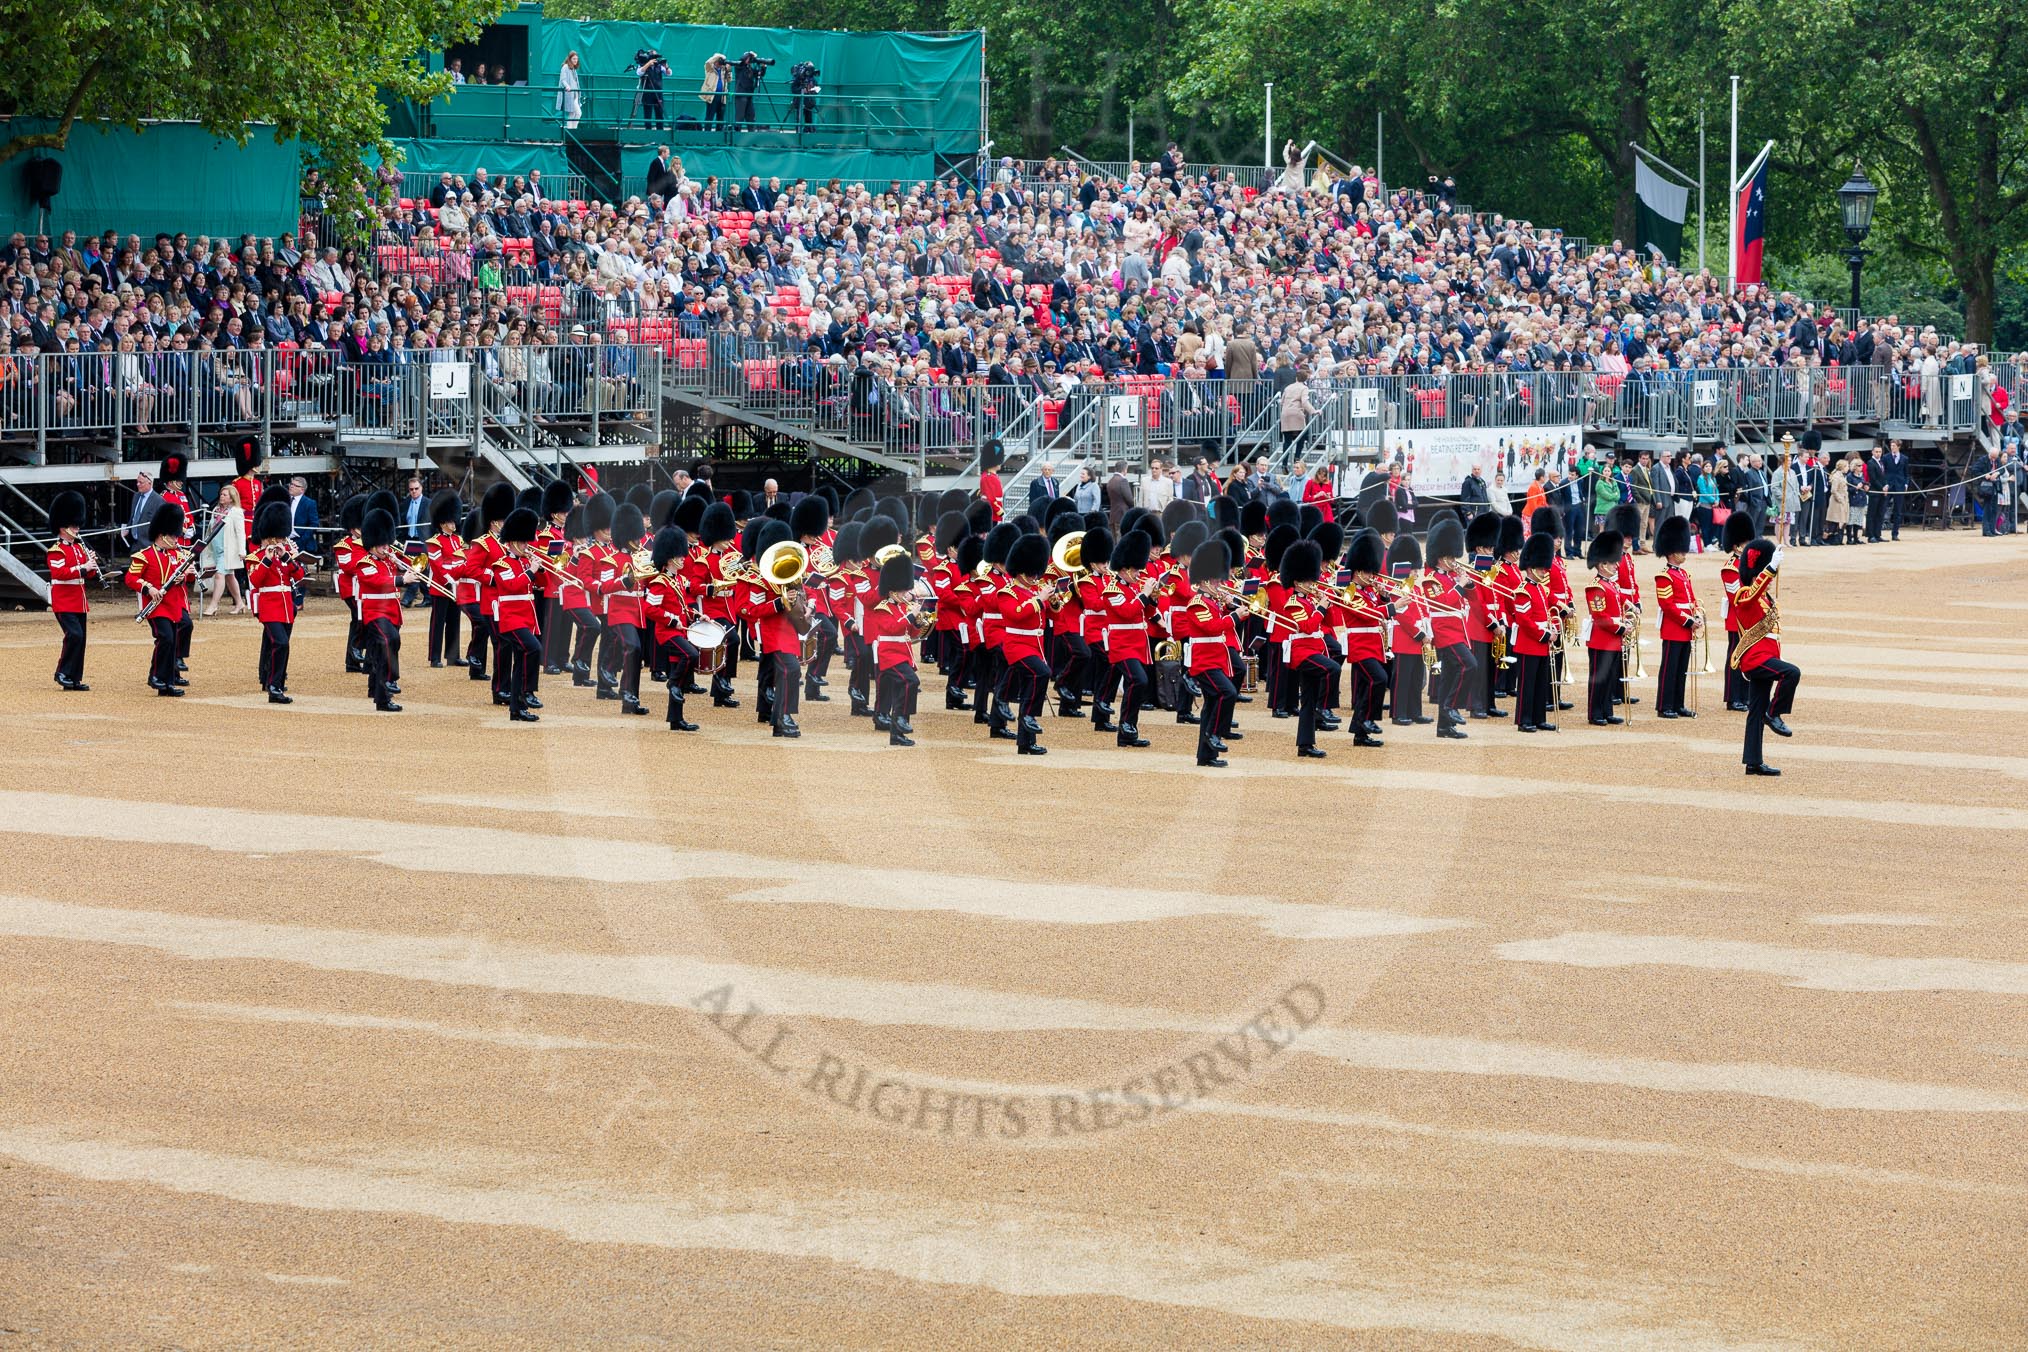 The Colonel's Review 2016.
Horse Guards Parade, Westminster,
London,

United Kingdom,
on 04 June 2016 at 10:20, image #50